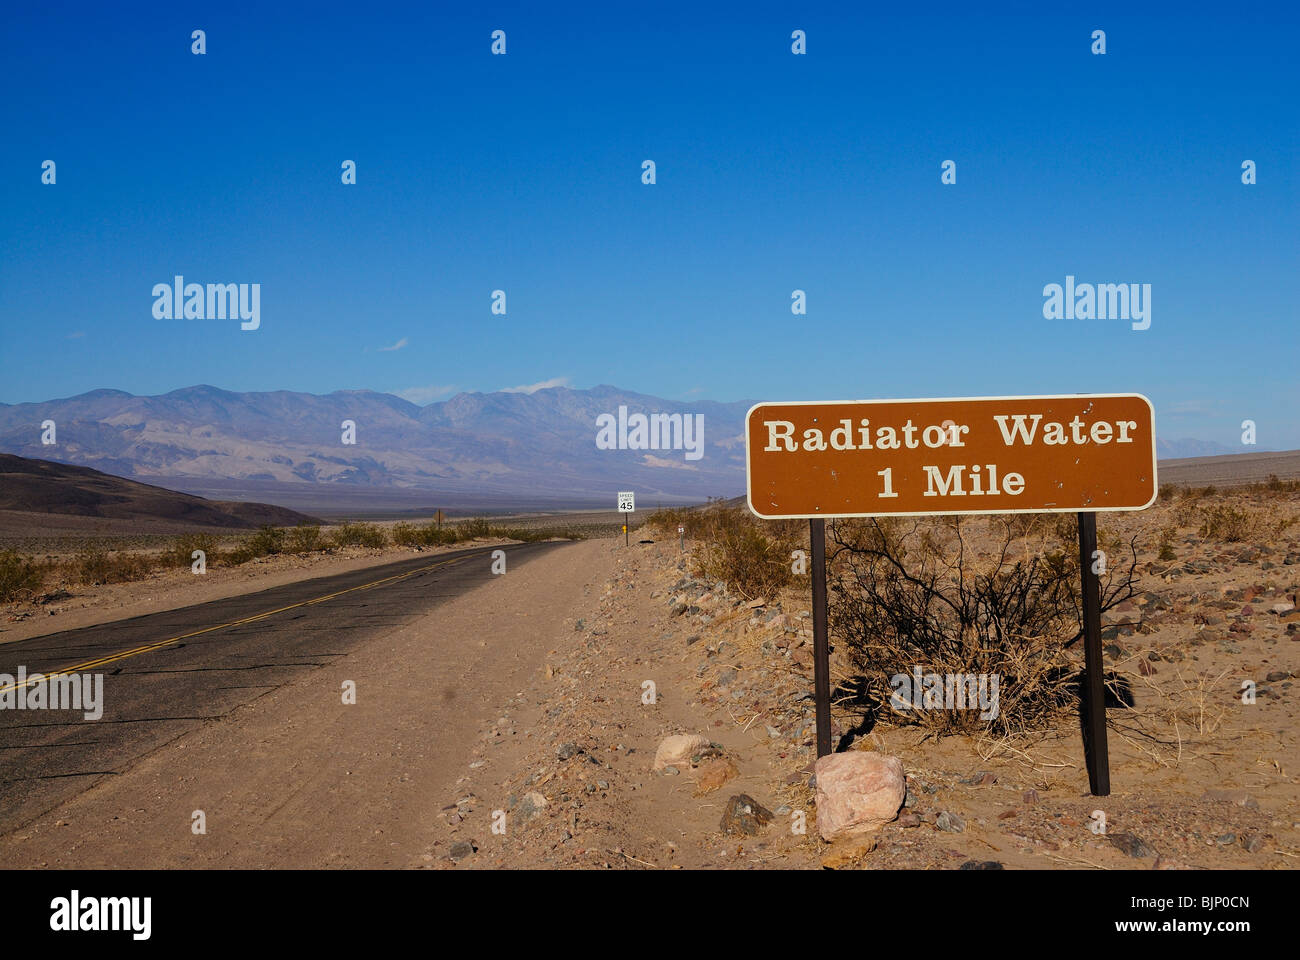 Radiator water sign along a road in Death Valley, California state Stock Photo